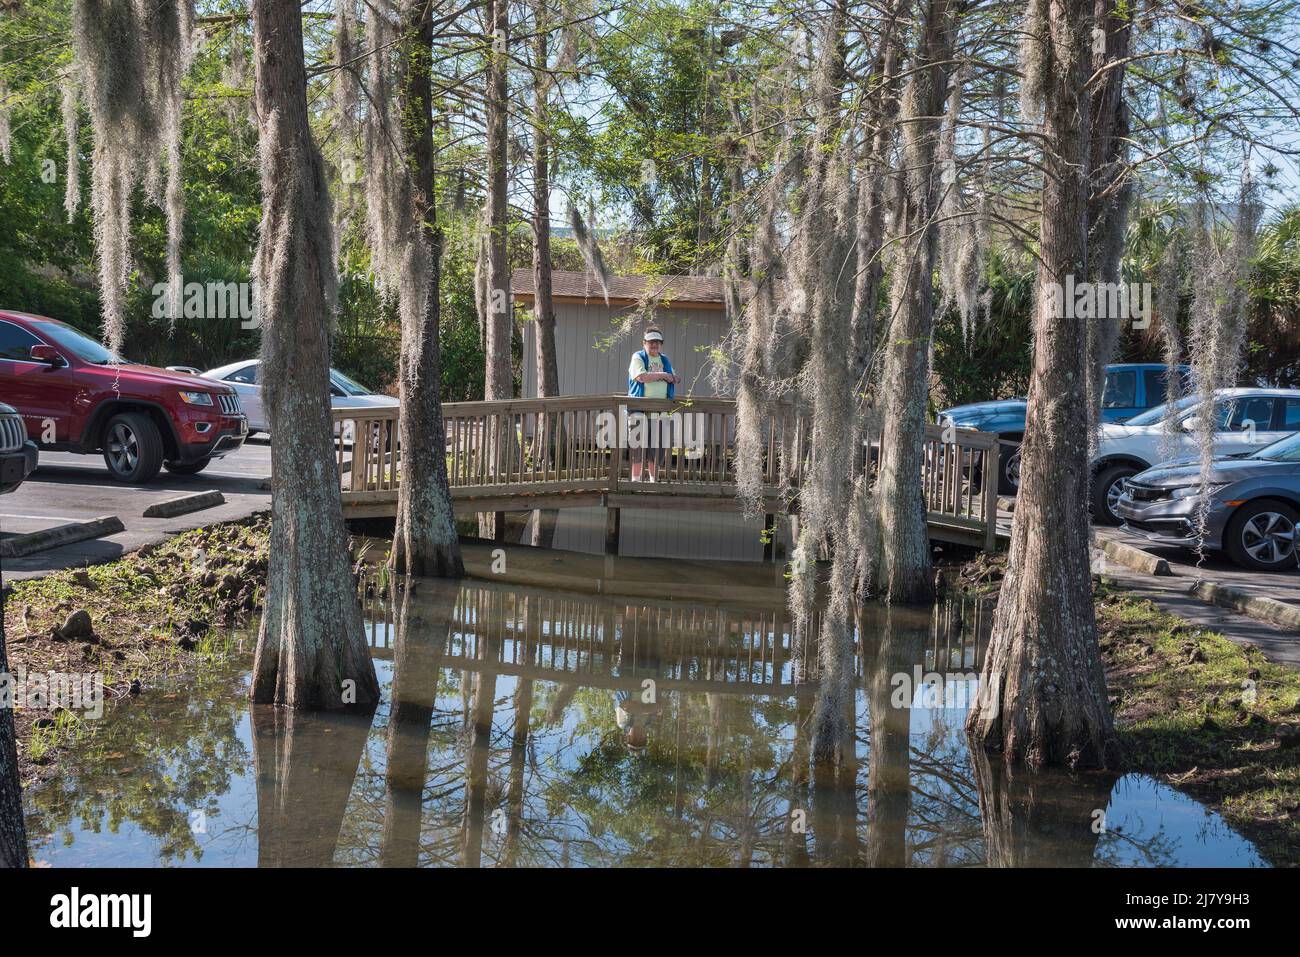 Perkins Restaurant in Gainesville, Florida, has a mini-swamp in the middle of their parking lot, complete with cypress trees. Stock Photo